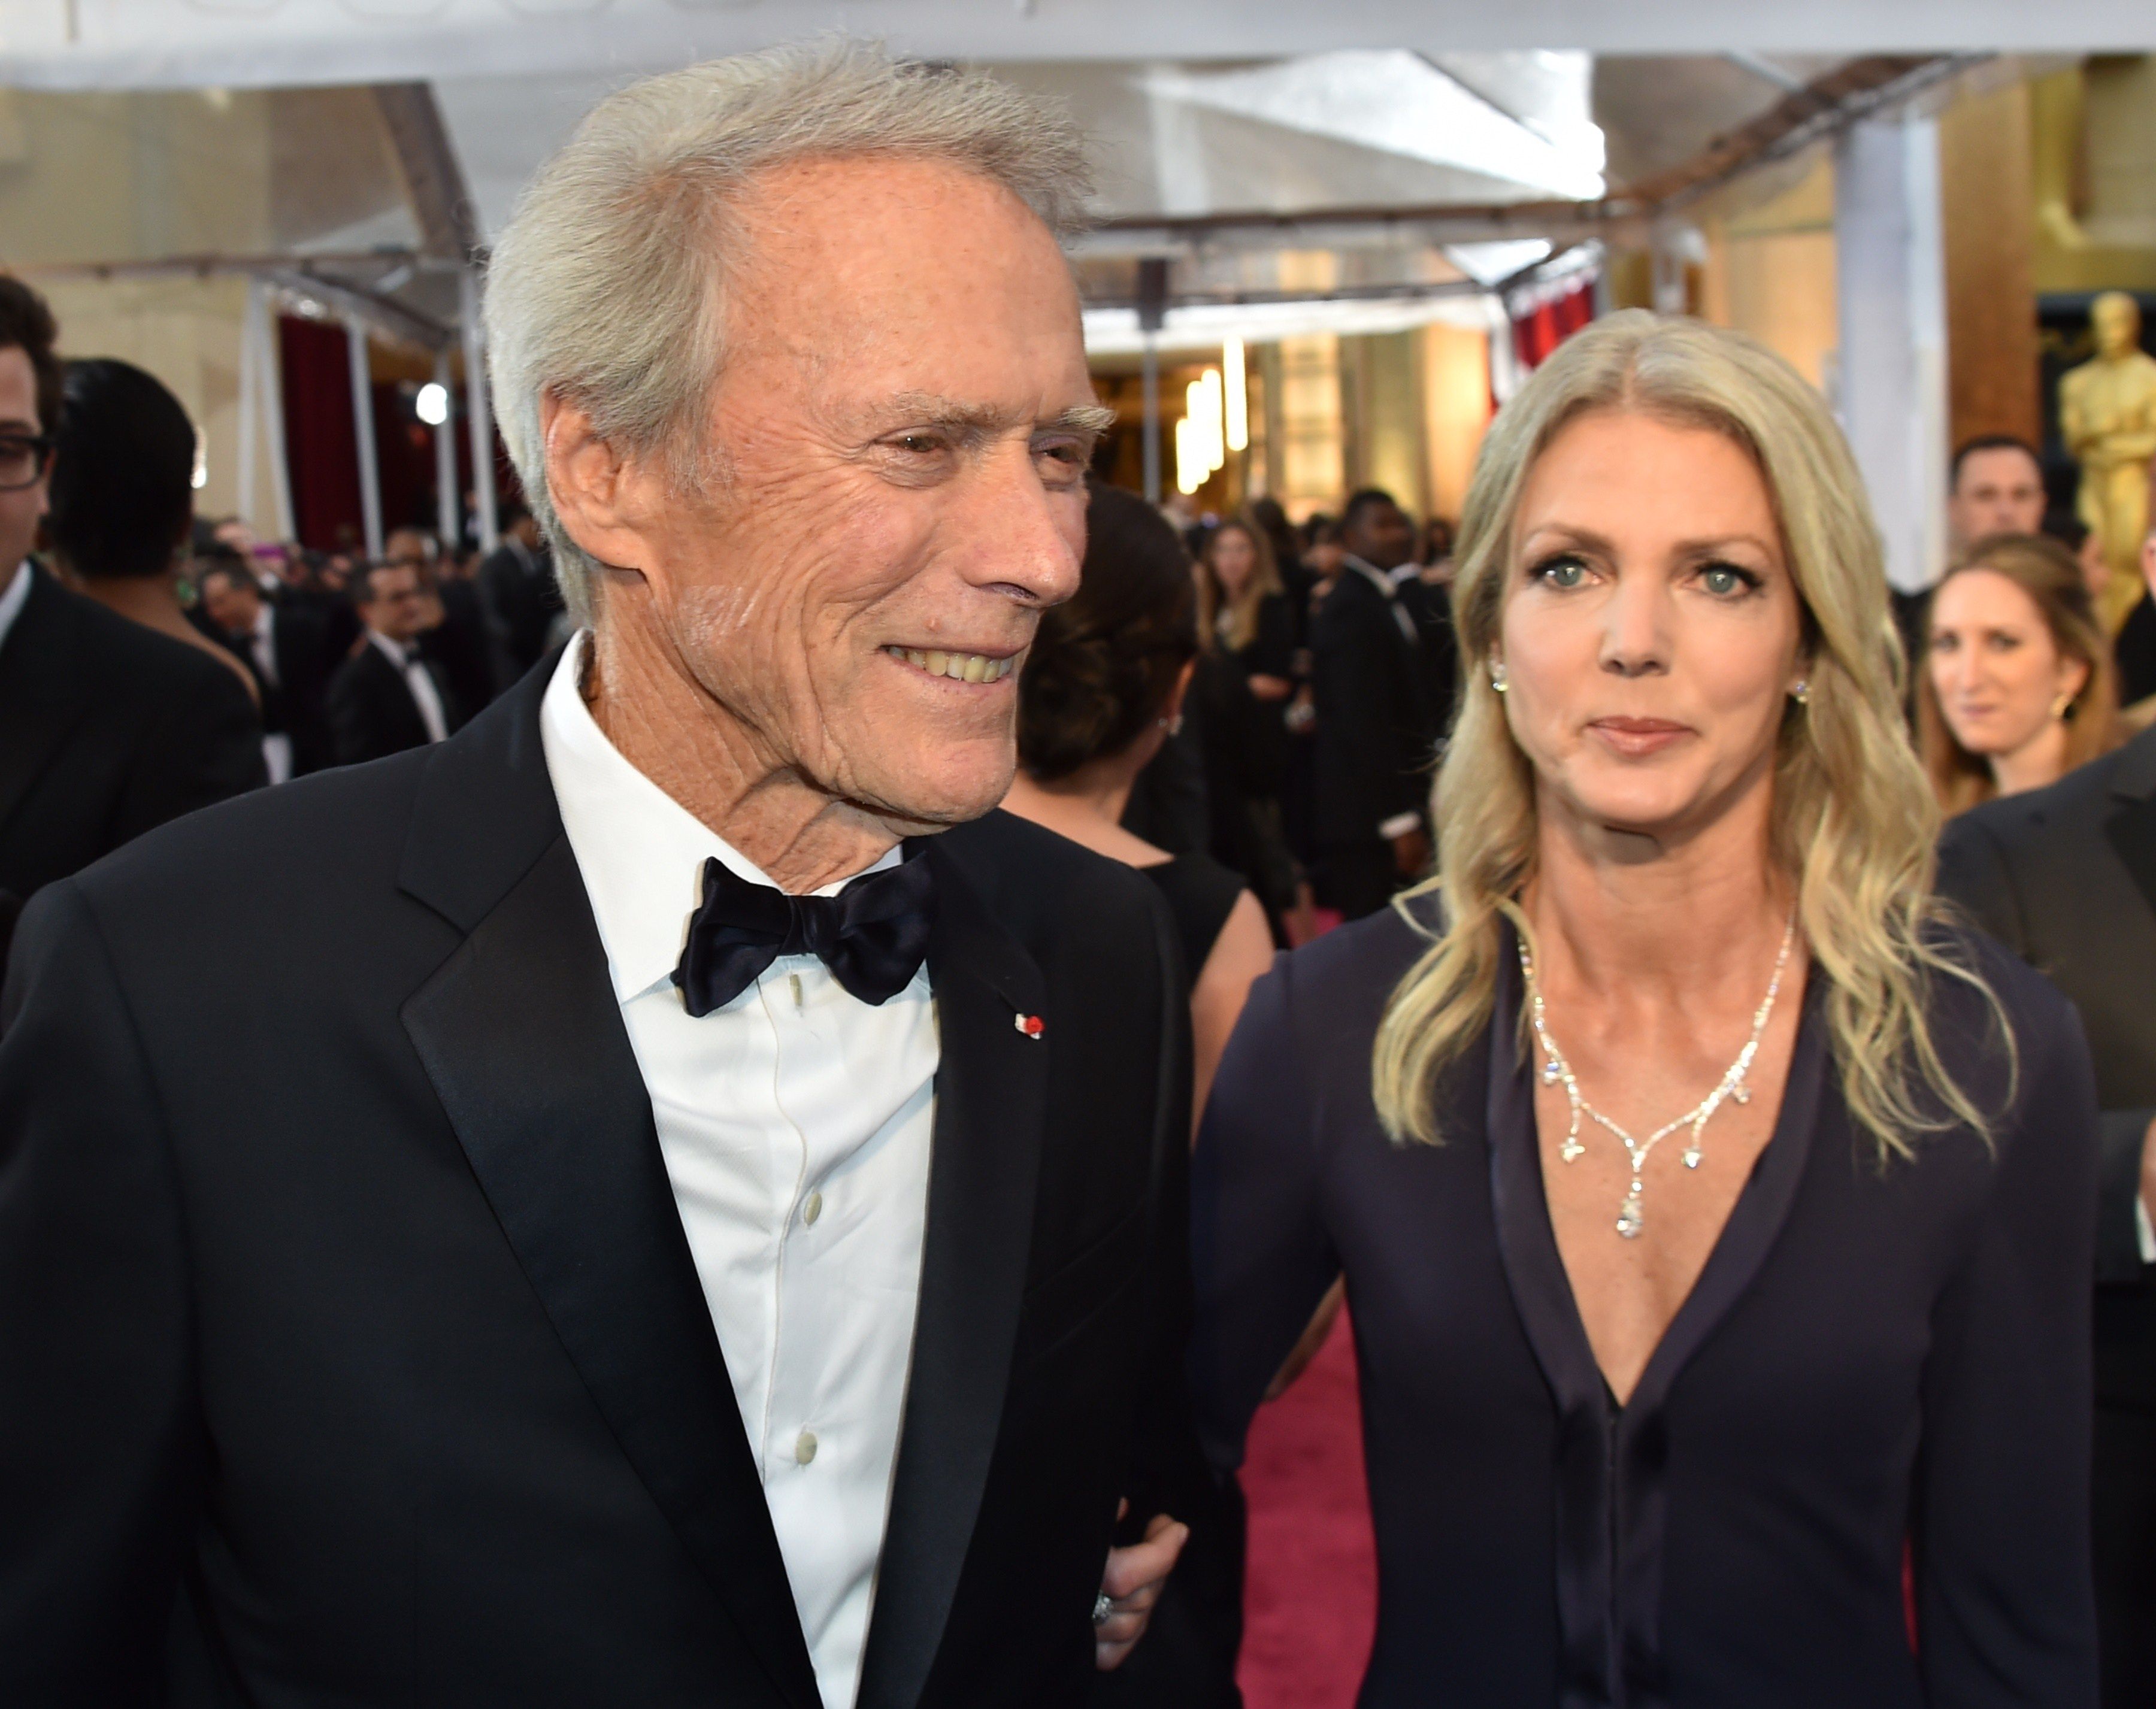 Clint Eastwood and Christina Sandera during the 87th Oscars on February 22, 2015 in Hollywood, California. | Source: Getty Images